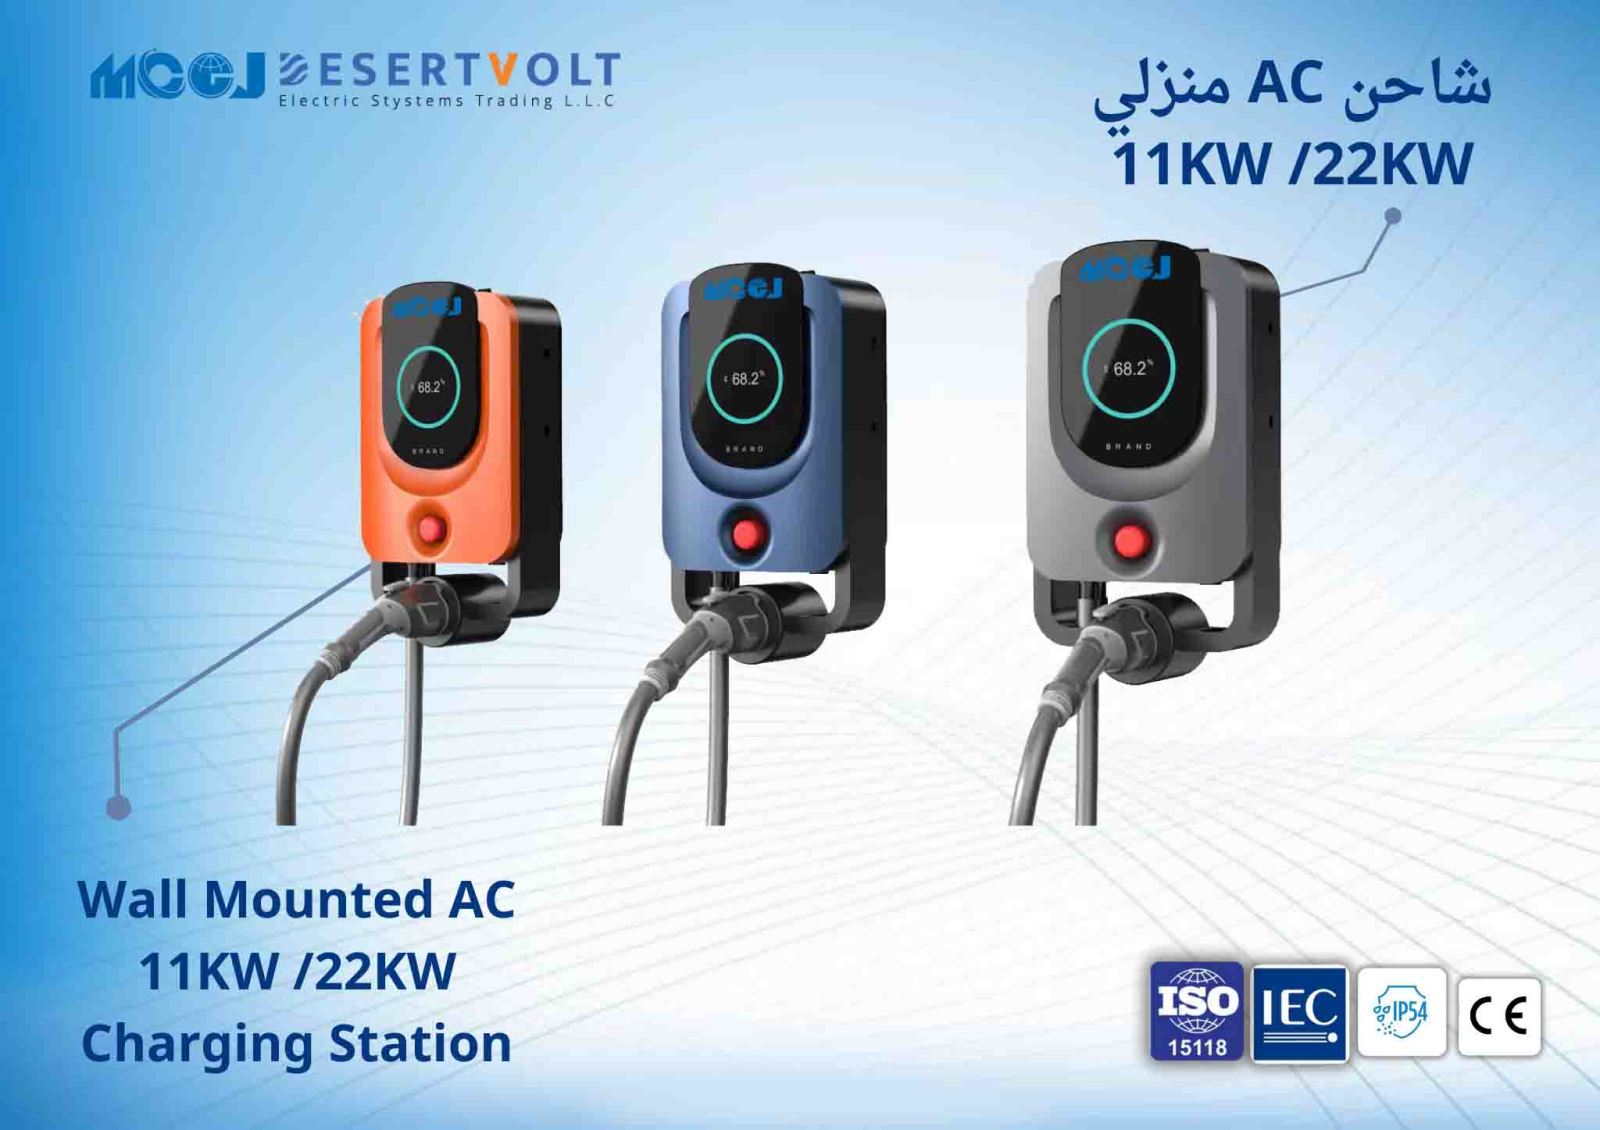 Wall Mounted AC 11KW /22KW Charging Station